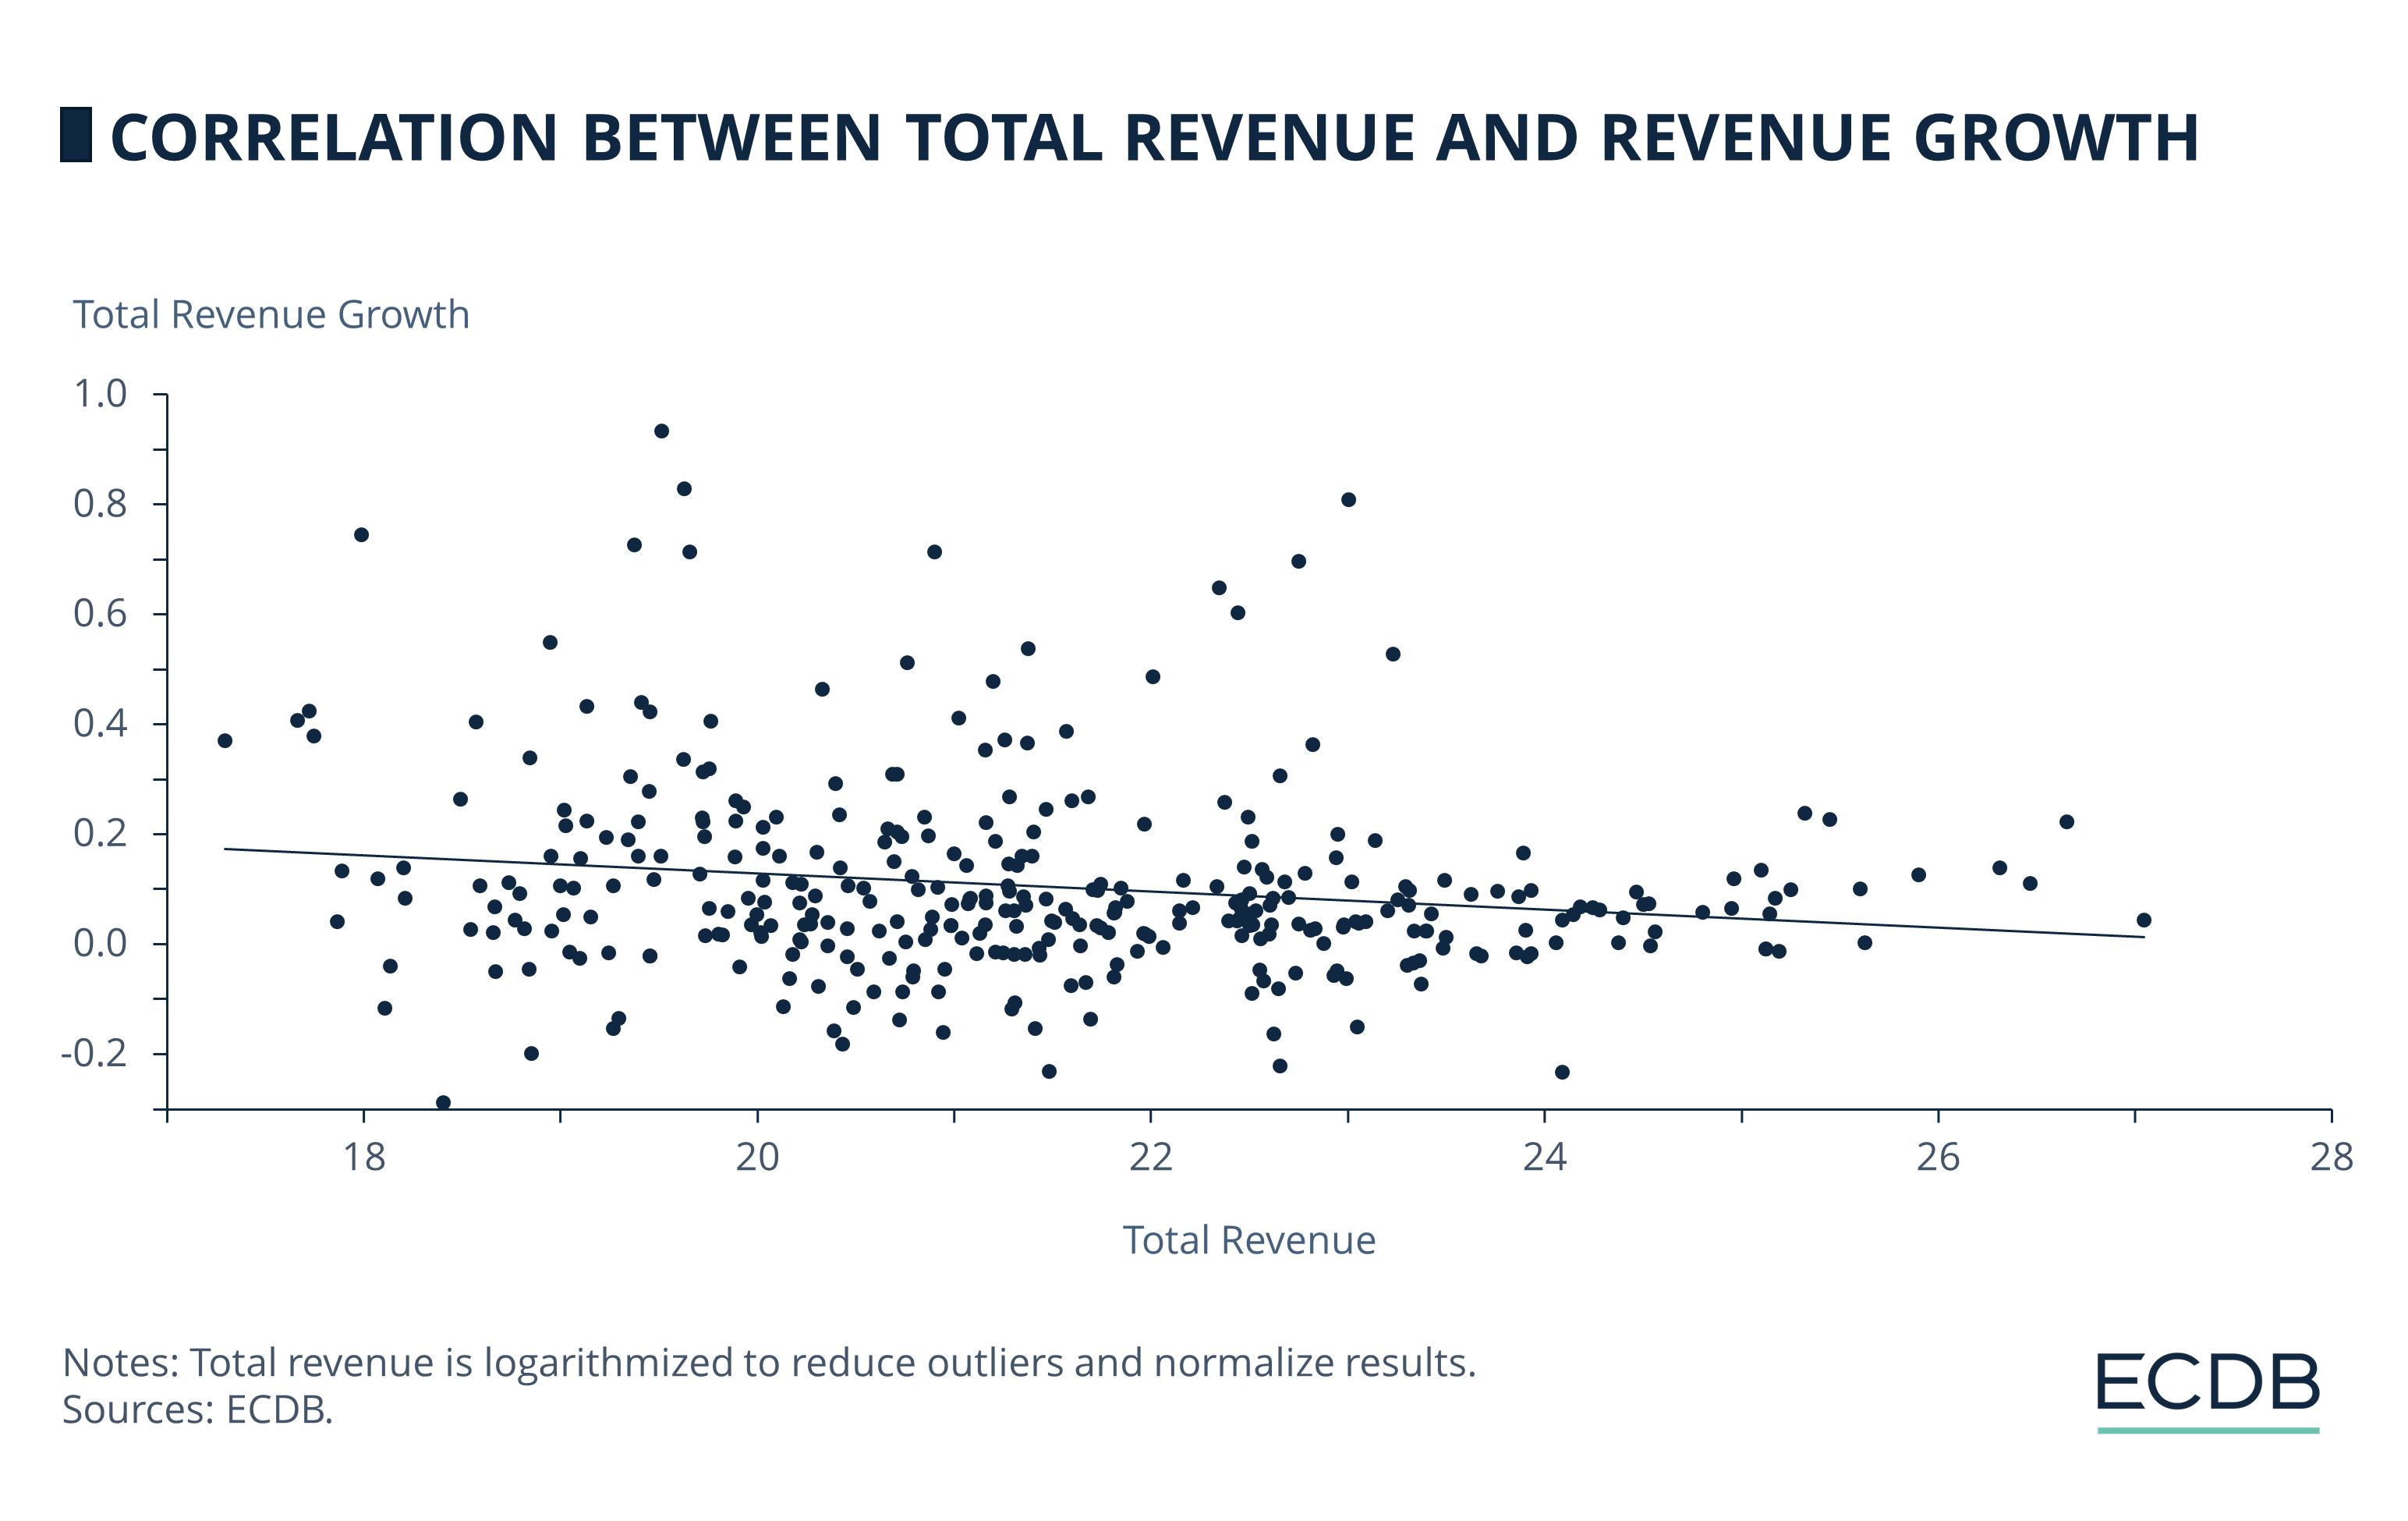 Correlation between Total Revenue and Revenue Growth